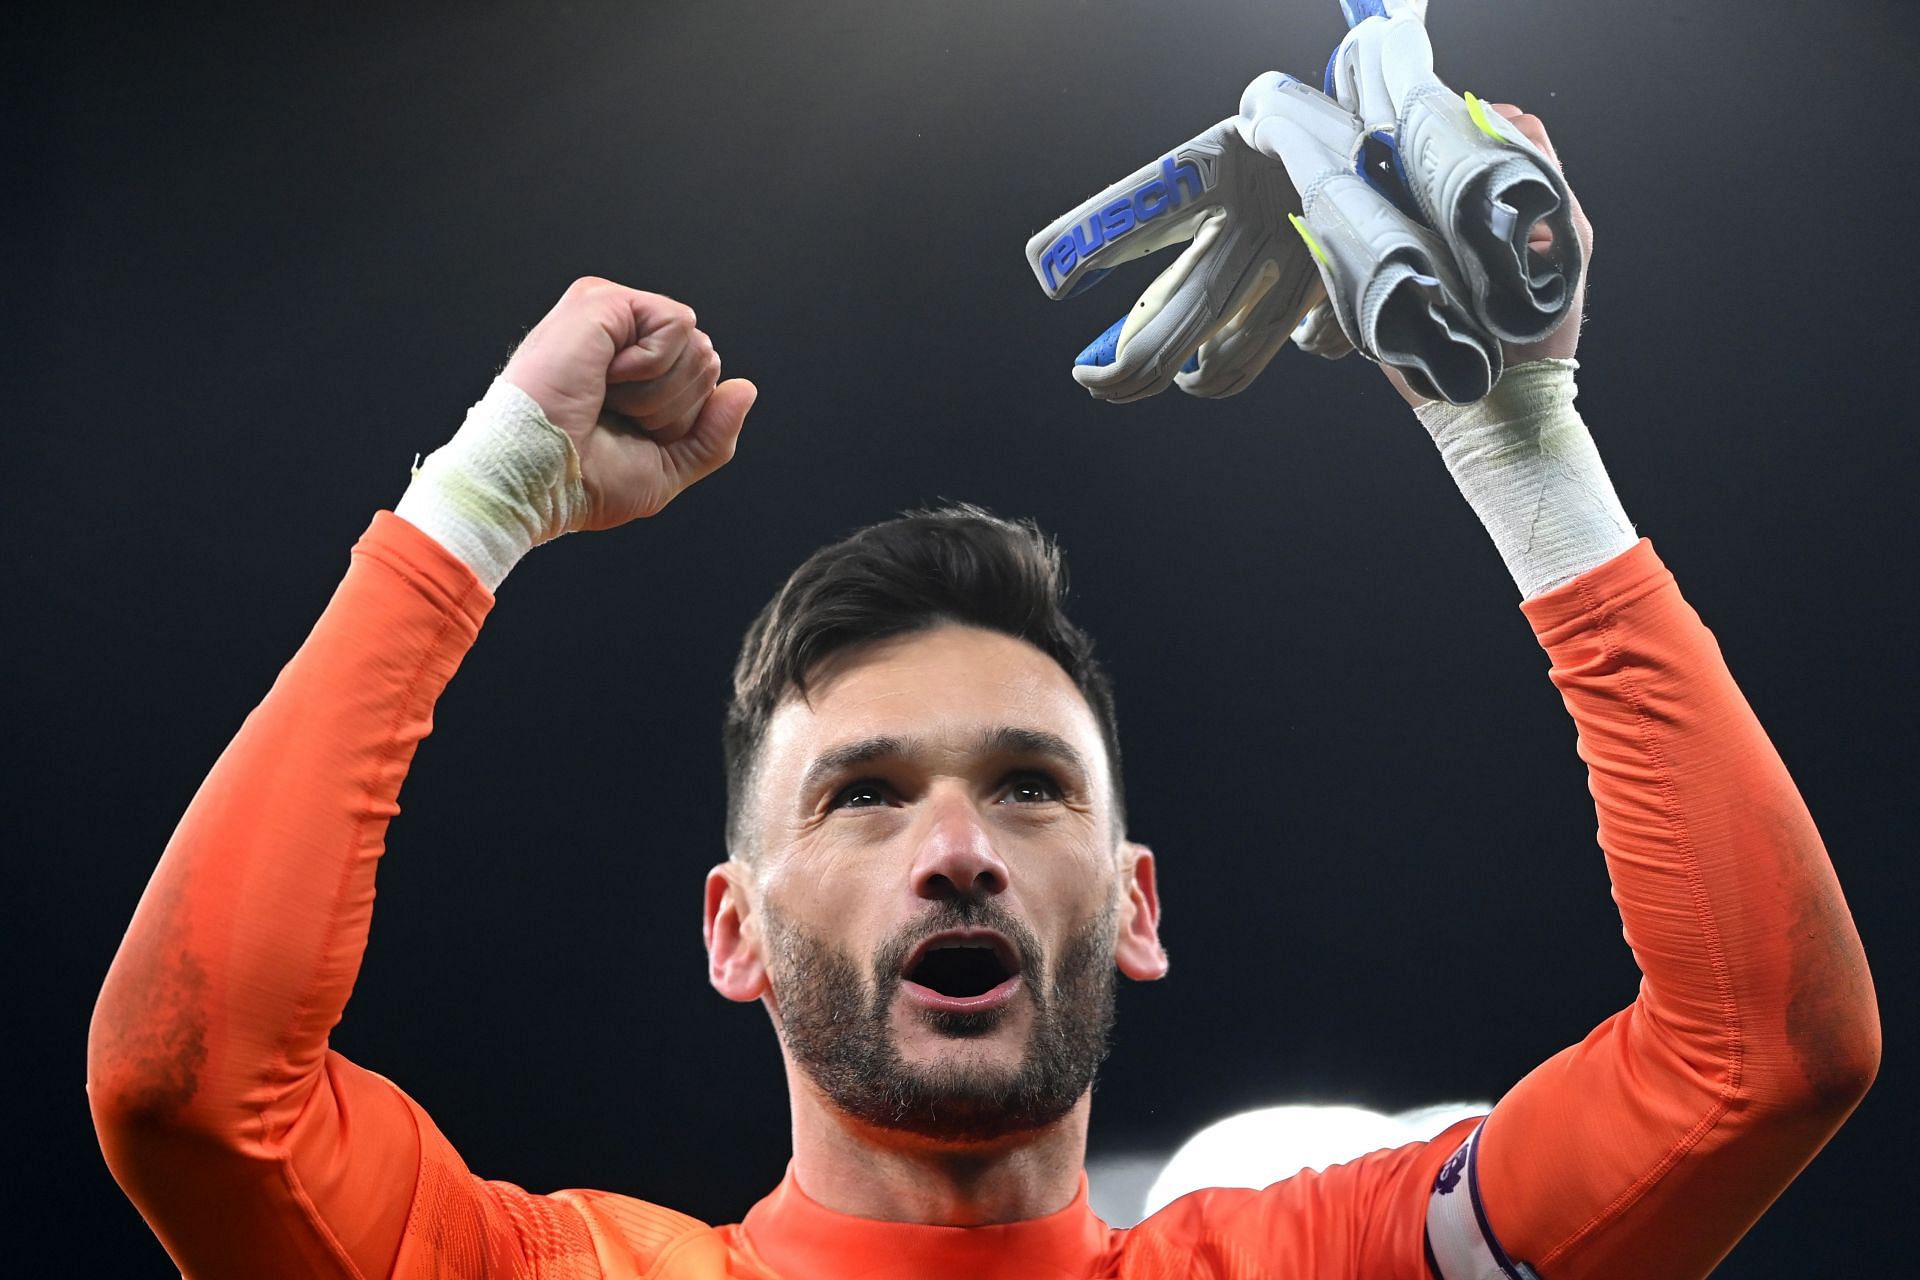 Hugo Lloris has come to the defence of Mauricio Pochettino (not in pic).